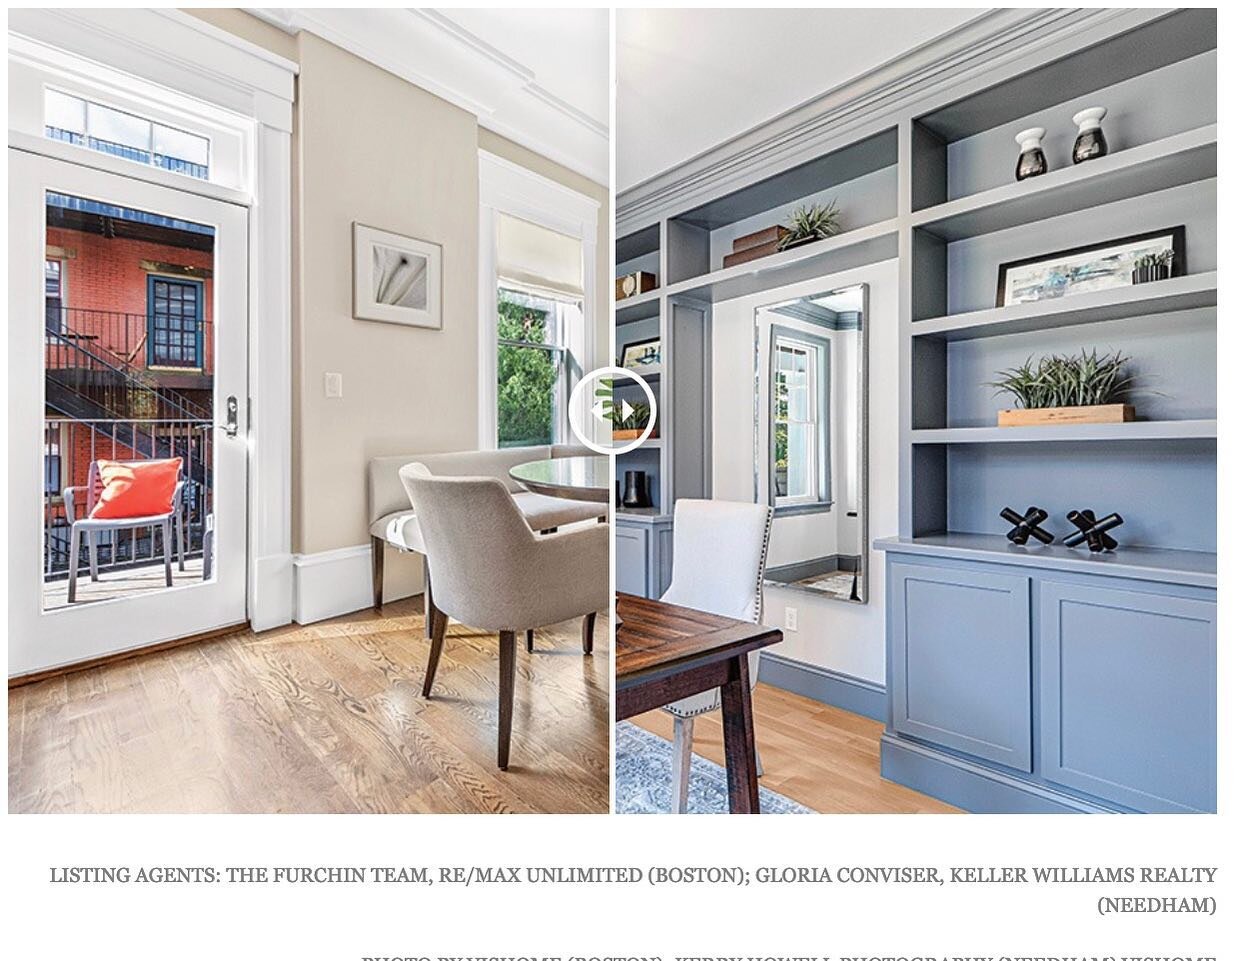 A Classic South End Brownstone vs. a New Build in Needham! Thank you for the feature @bostonmagazine. Always happy to share my thoughts. Special shout out to @pacebuildersinc and @kerry_howell_photography.

https://www.bostonmagazine.com/property/202